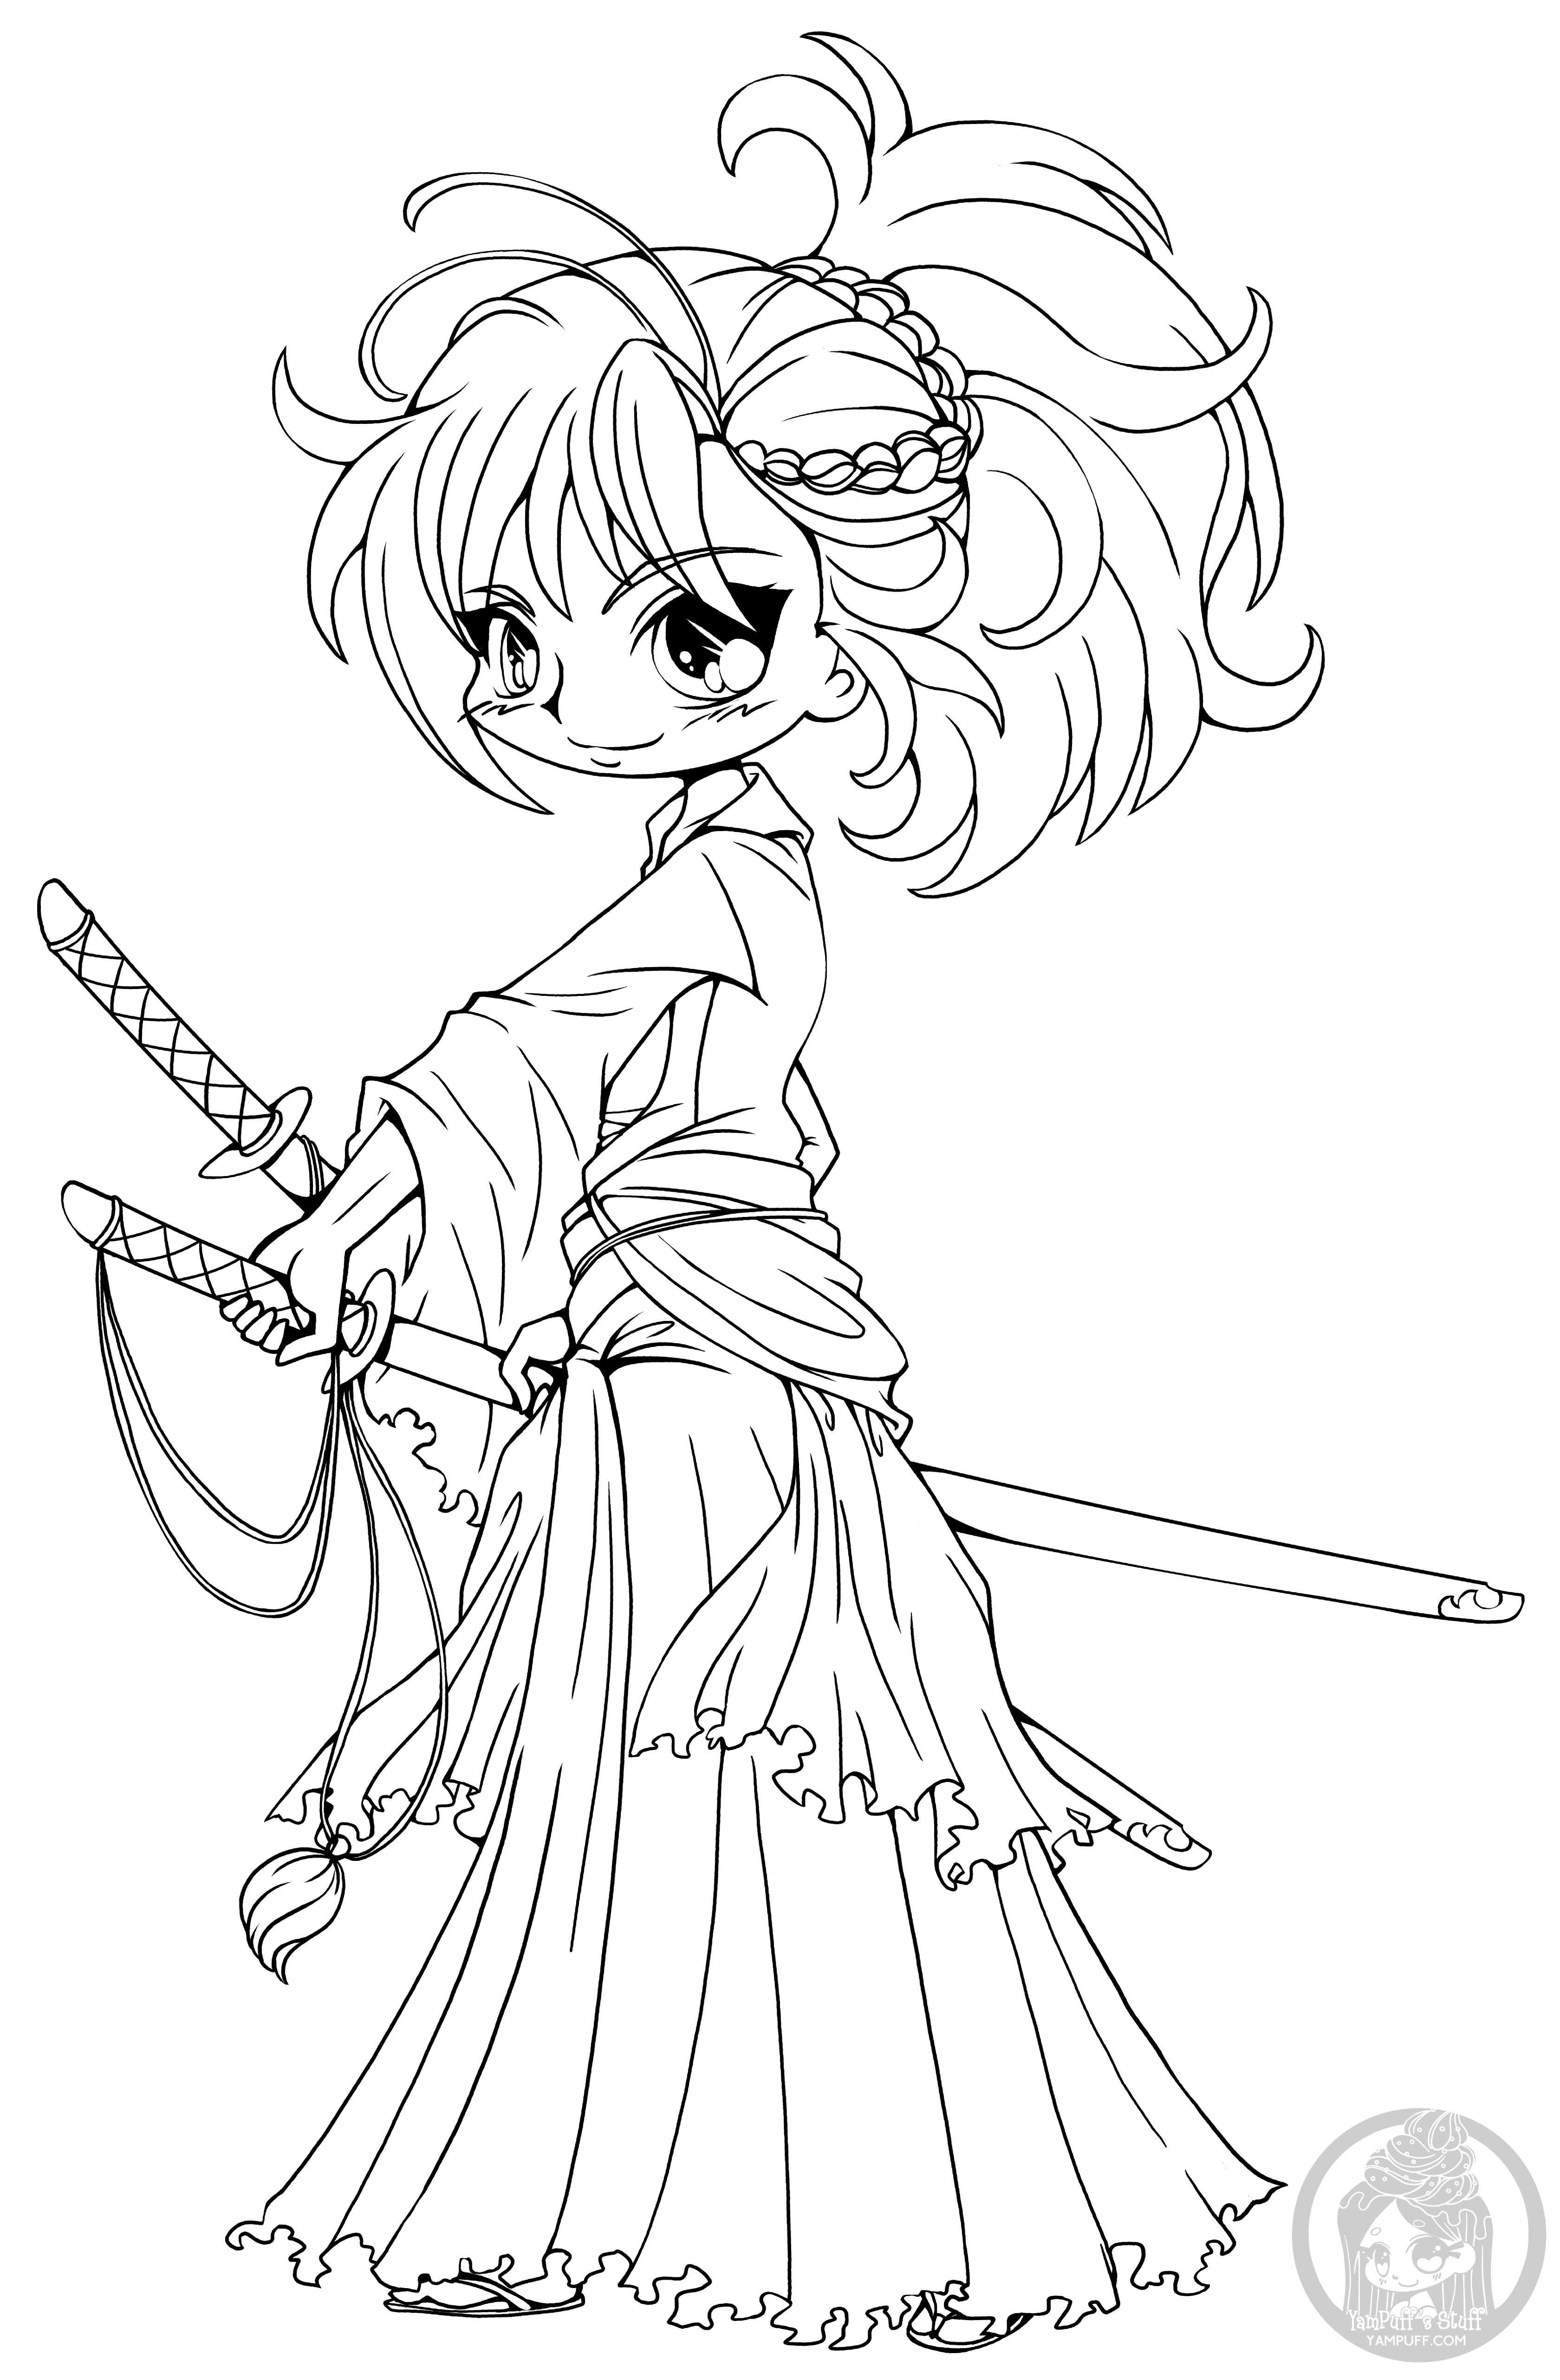 Chibi Coloring Pages Girl
 Fanart Free Chibi Colouring Pages • YamPuff s Stuff